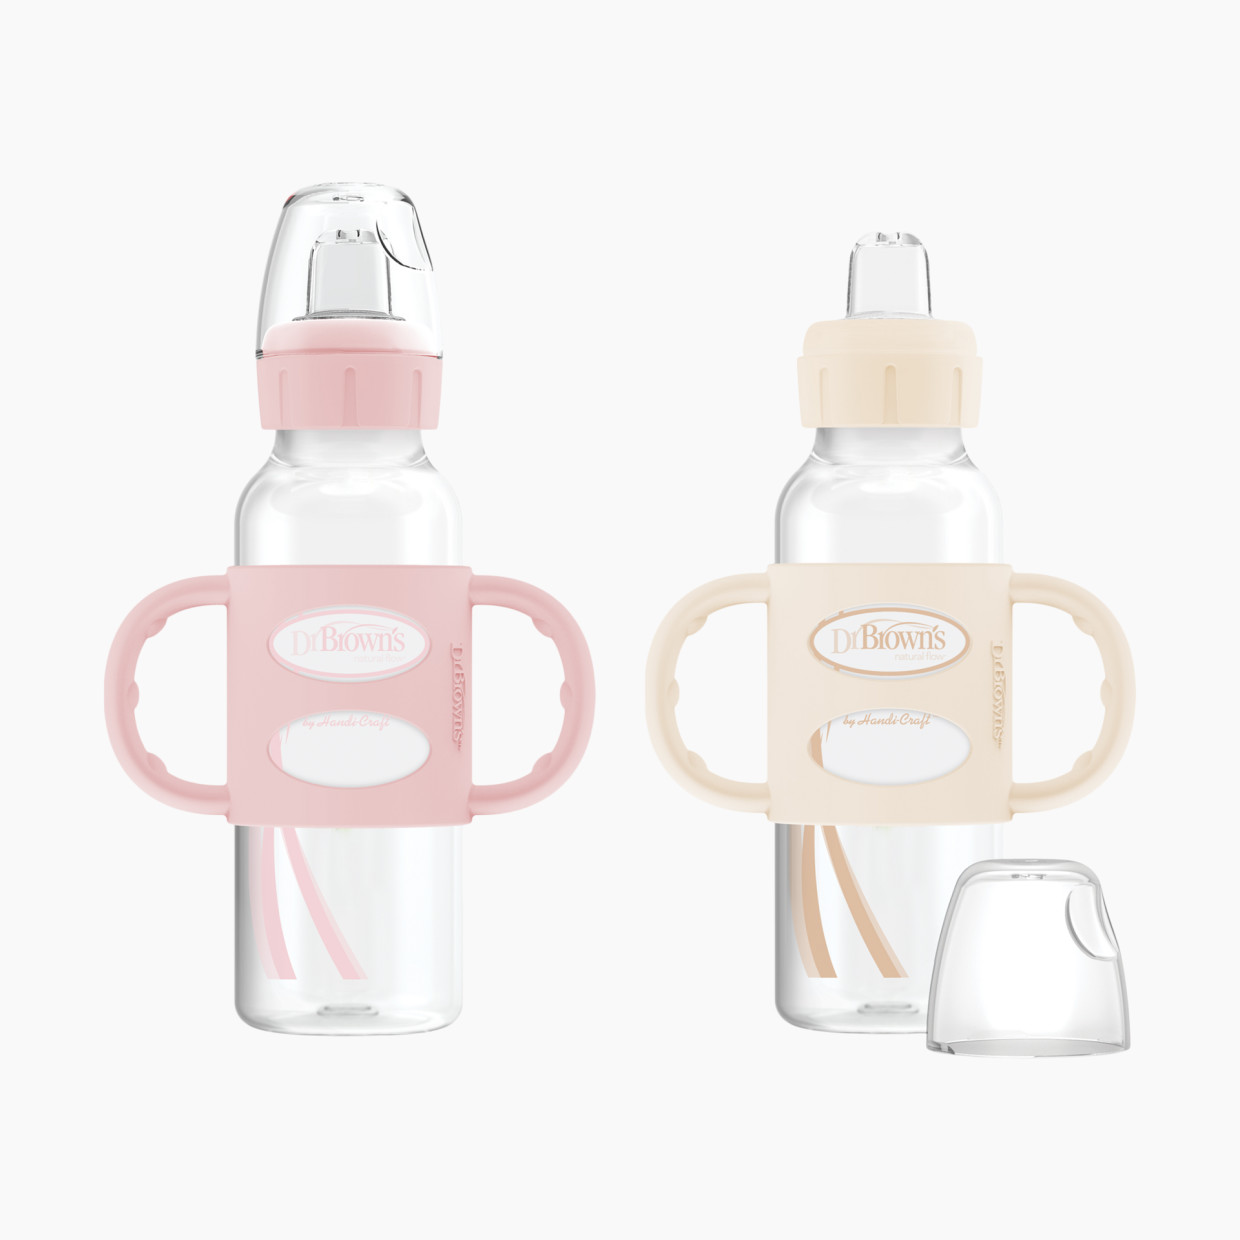 Dr. Brown's Narrow Sippy Spout Bottle w/ Silicone Handles (2-Pack) - Light Pink & White, 8 Oz, 2.